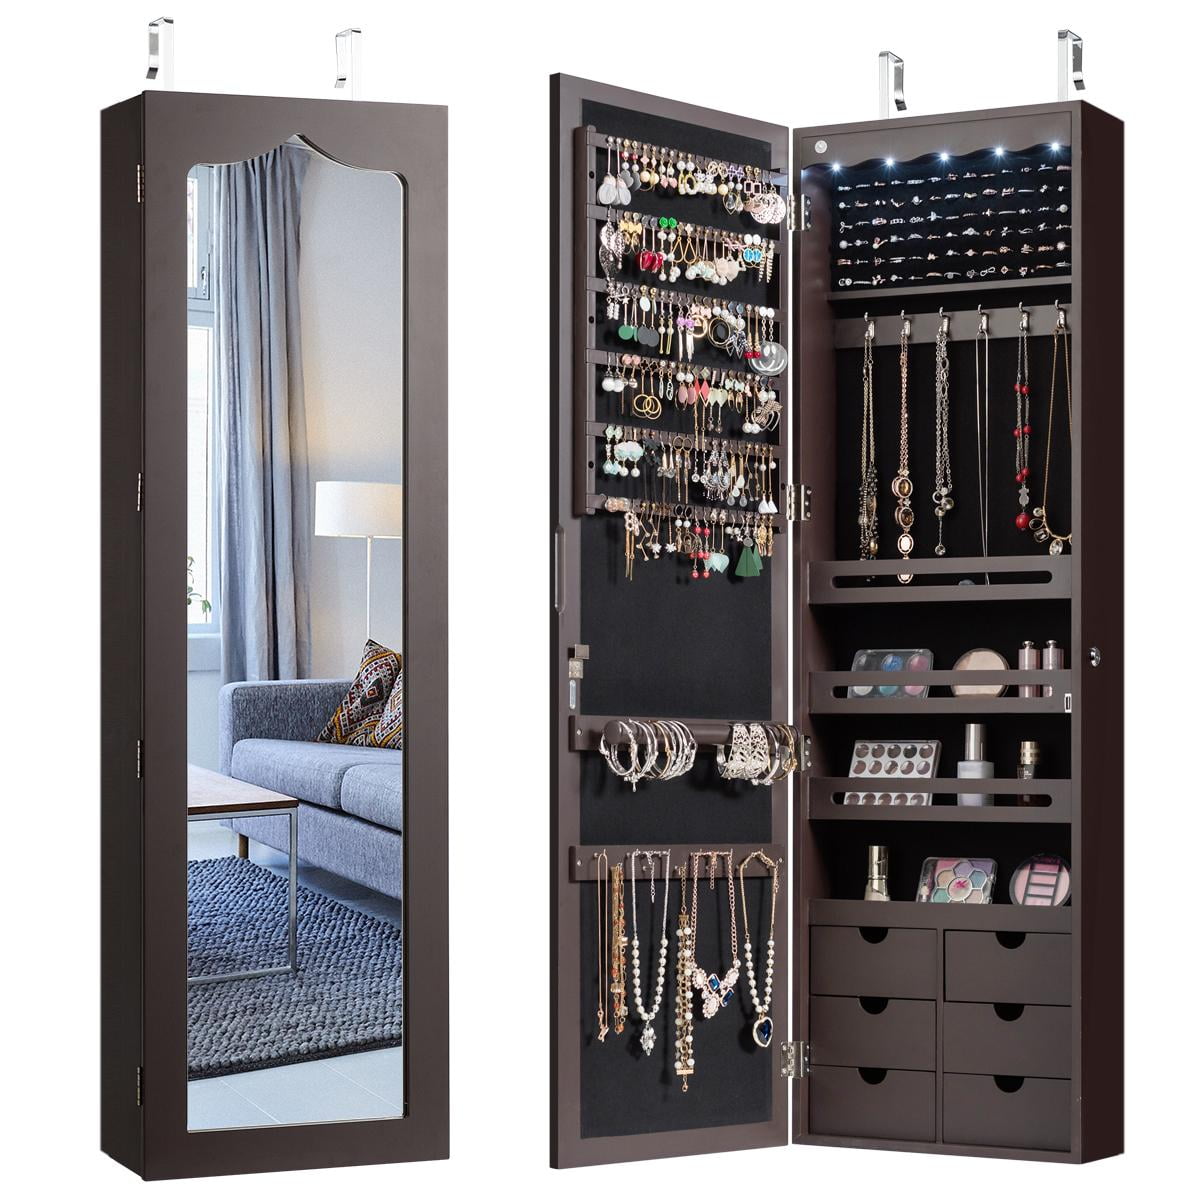 Black Giantex 12 LEDs Jewelry Cabinet Wall Door Mount Jewelry Armoire Cabinet Lockable Mounted Full Lenghth Mirrored Jewelry Storage Armoire Organizer w/Mirror and LED Lights